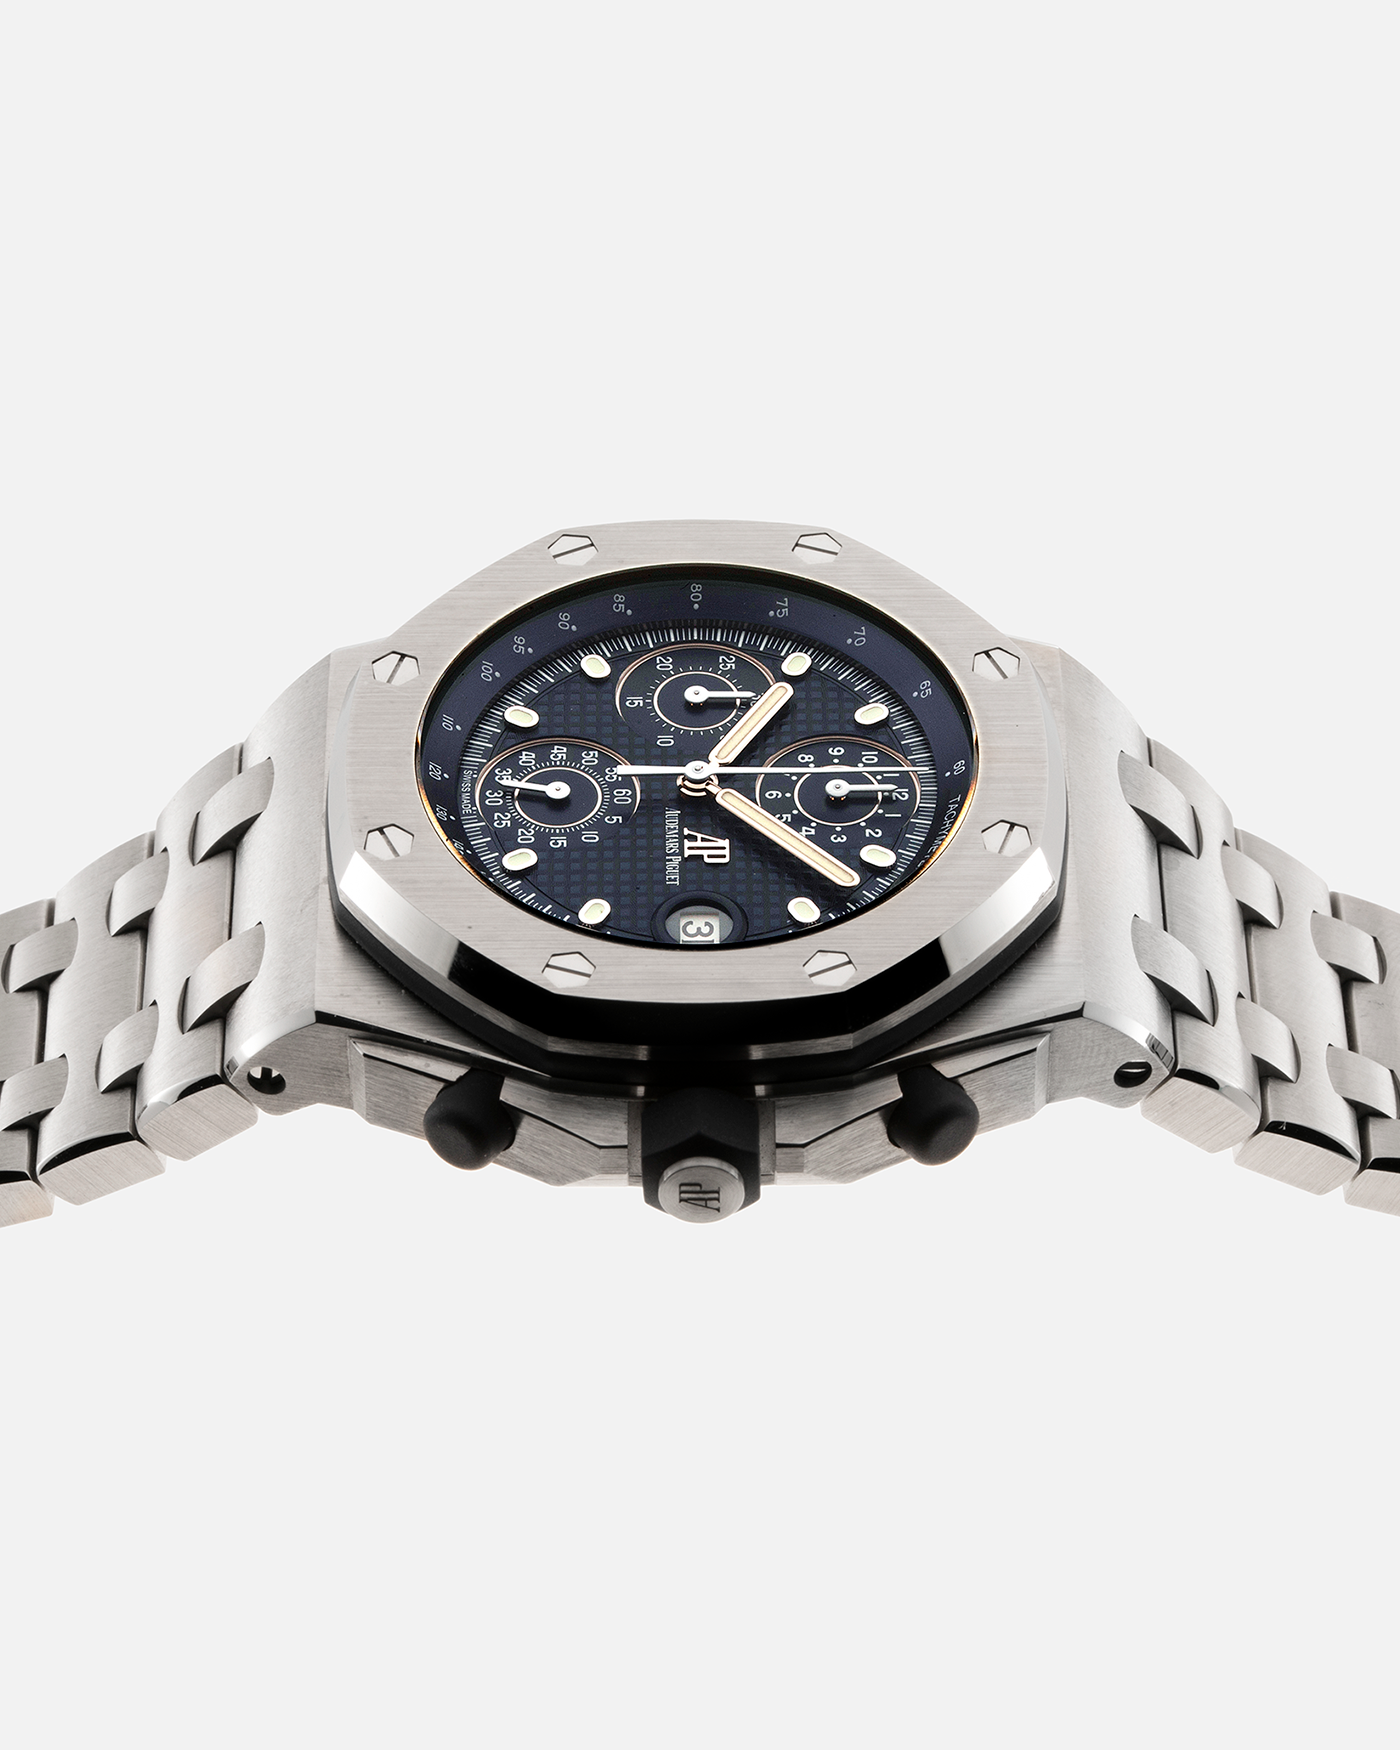 Brand: Audemars Piguet Year: 2021 Model: Royal Oak Offshore Chronograph Ref. 26238ST Material: Stainless Steel Movement: Cal.4404, Self-Winding, Flyback Chronograph Case Diameter: 42mm Strap: Audemars Piguet Stainless Steel Integrated Bracelet, additional Audemars Piguet Rubber Strap with Signed Stainless Steel Tang Buckle 